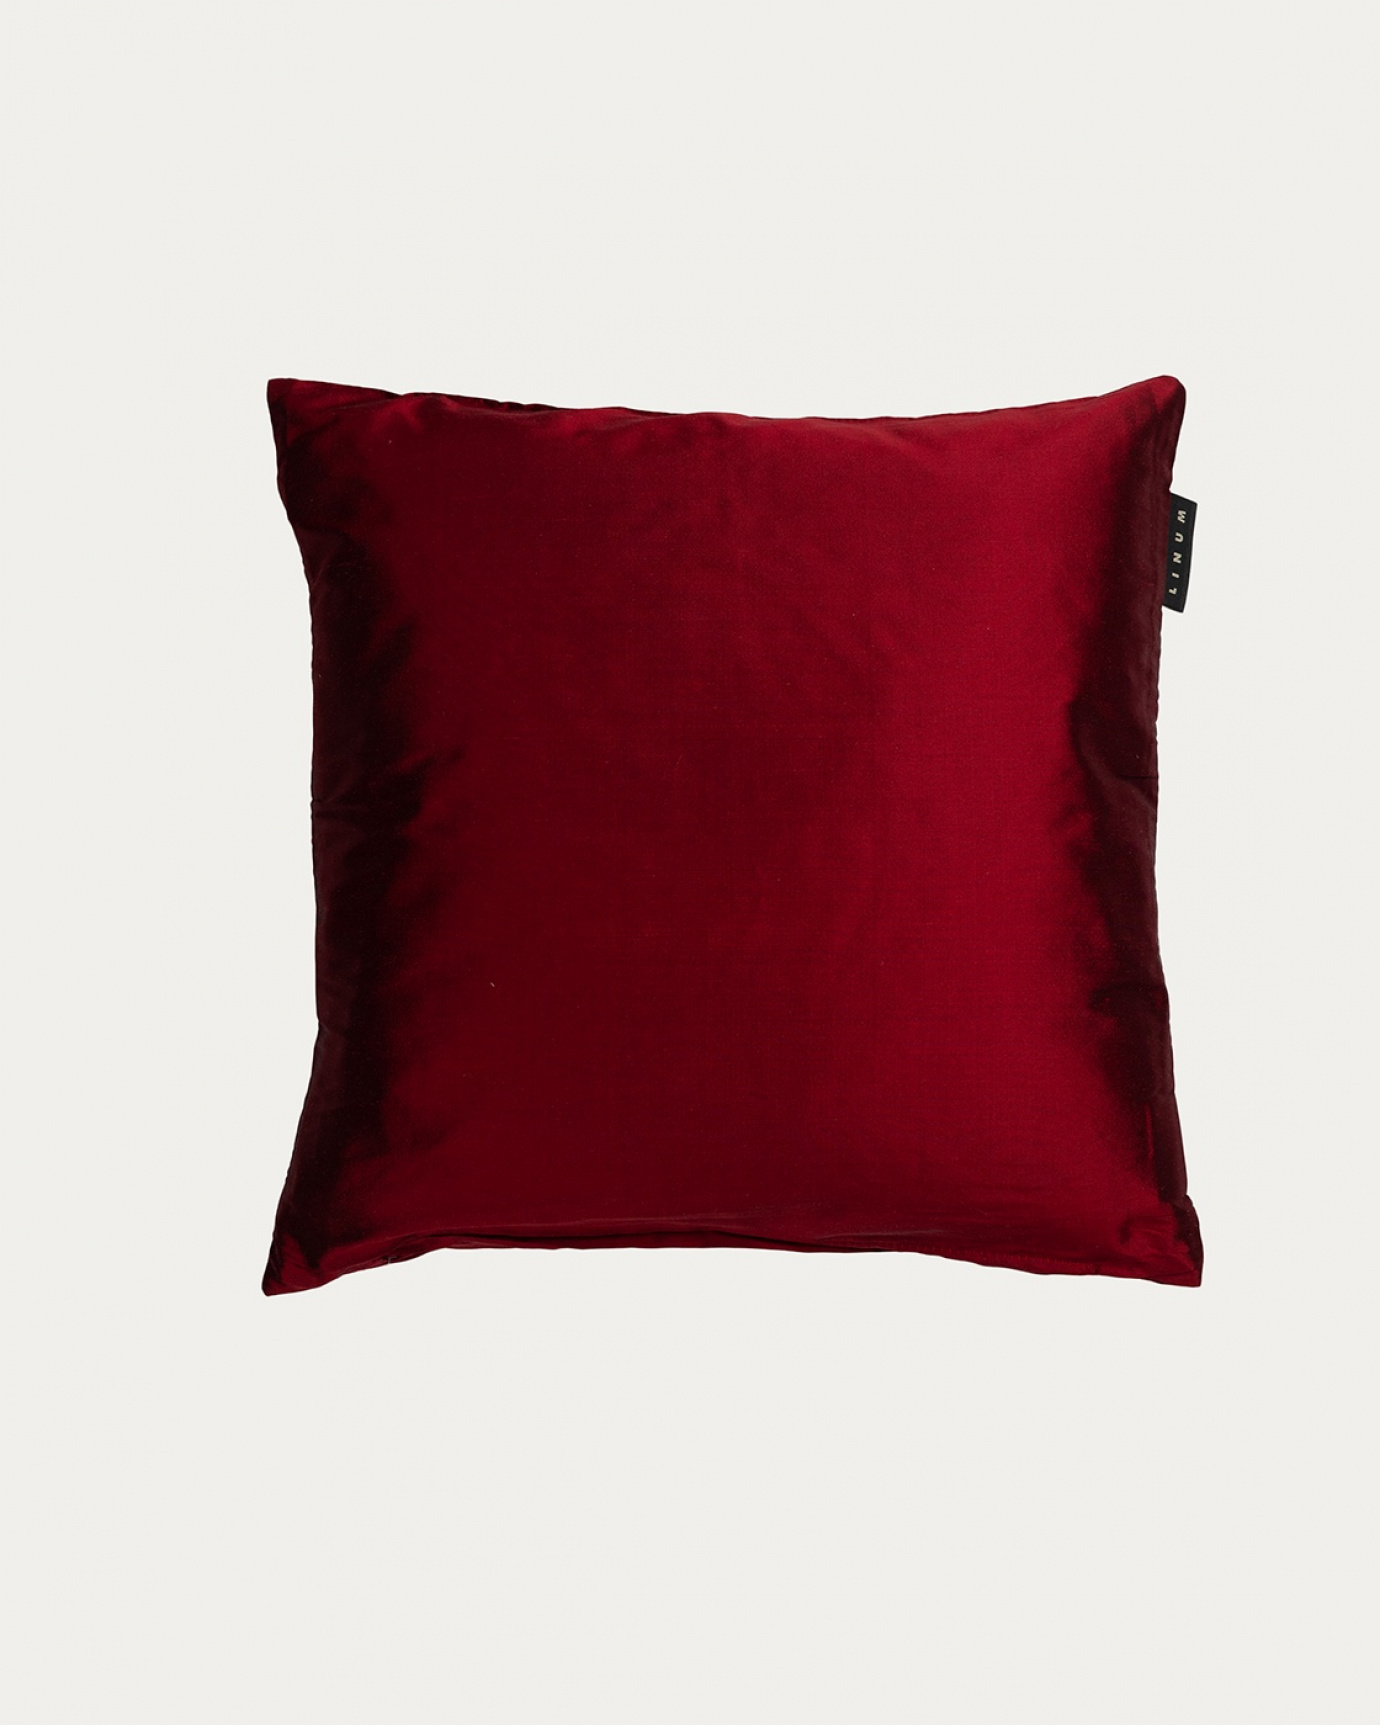 Product image pale wine red SILK cushion cover made of 100% dupion silk that gives a nice lustre from LINUM DESIGN. Size 40x40 cm.